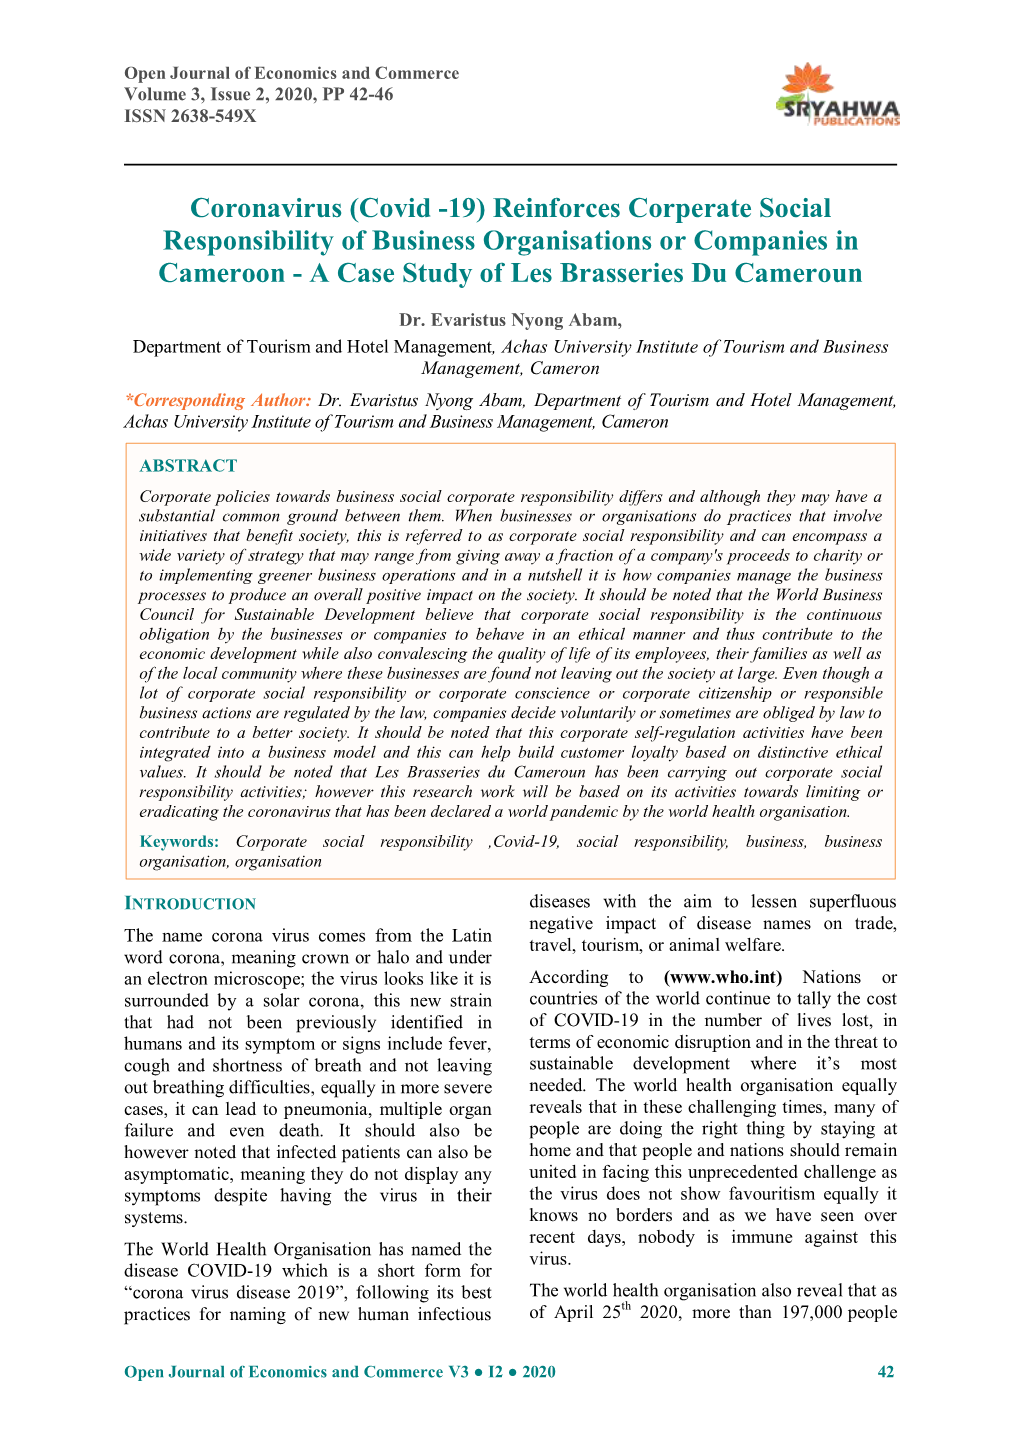 Coronavirus (Covid -19) Reinforces Corperate Social Responsibility of Business Organisations Or Companies in Cameroon - a Case Study of Les Brasseries Du Cameroun